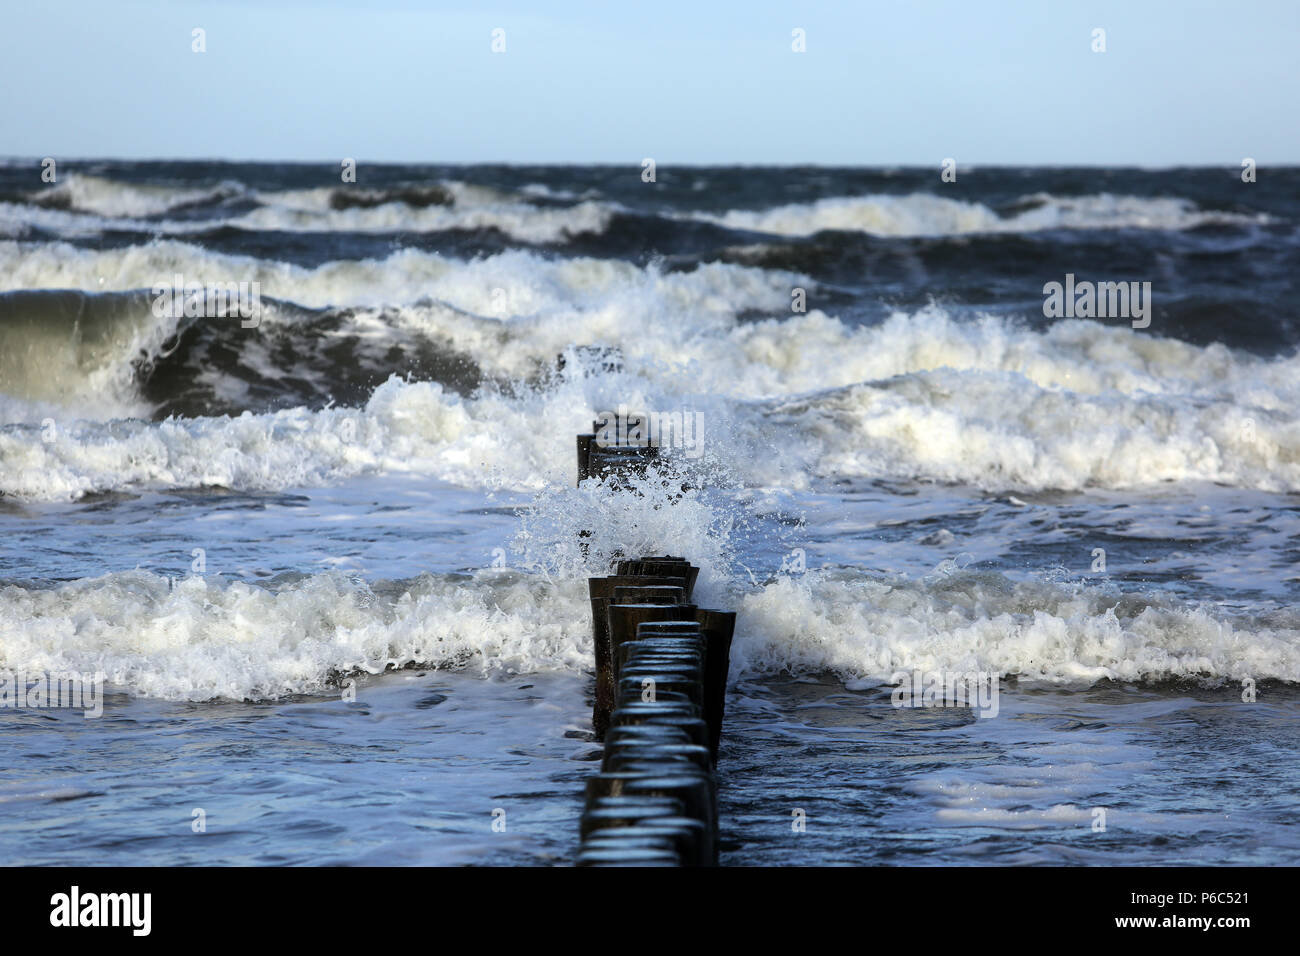 Wustrow, Germany - swell on the Baltic Sea Stock Photo